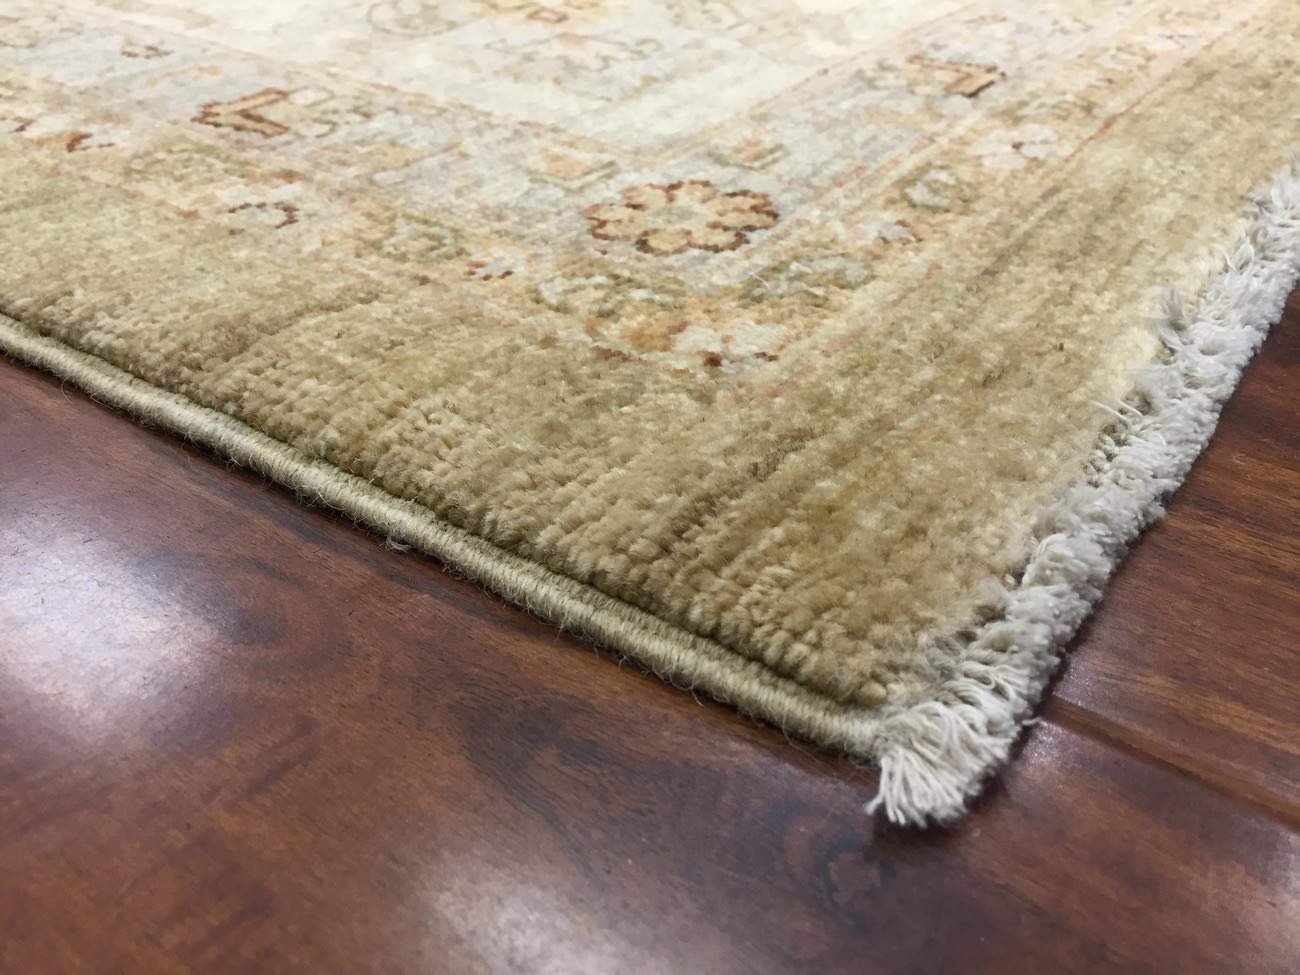 Hand Knotted Pakistani Rug-Ziegler-Gray/Beige/Multi-(11.8 by 8.8 Feet)